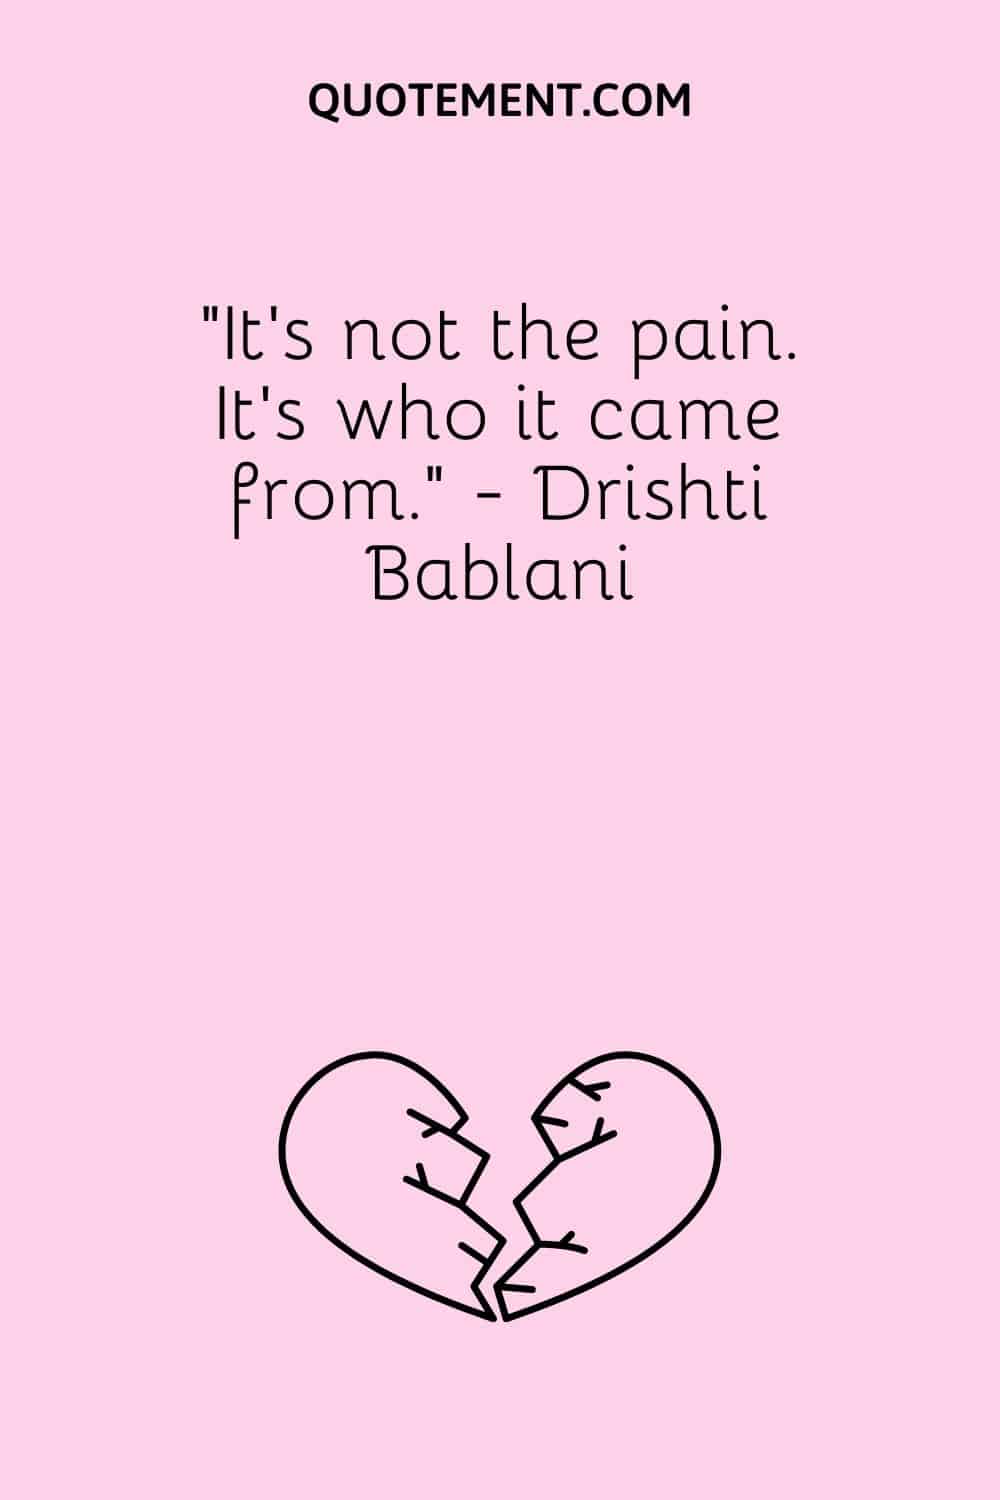 “It’s not the pain. It’s who it came from.” - Drishti Bablani